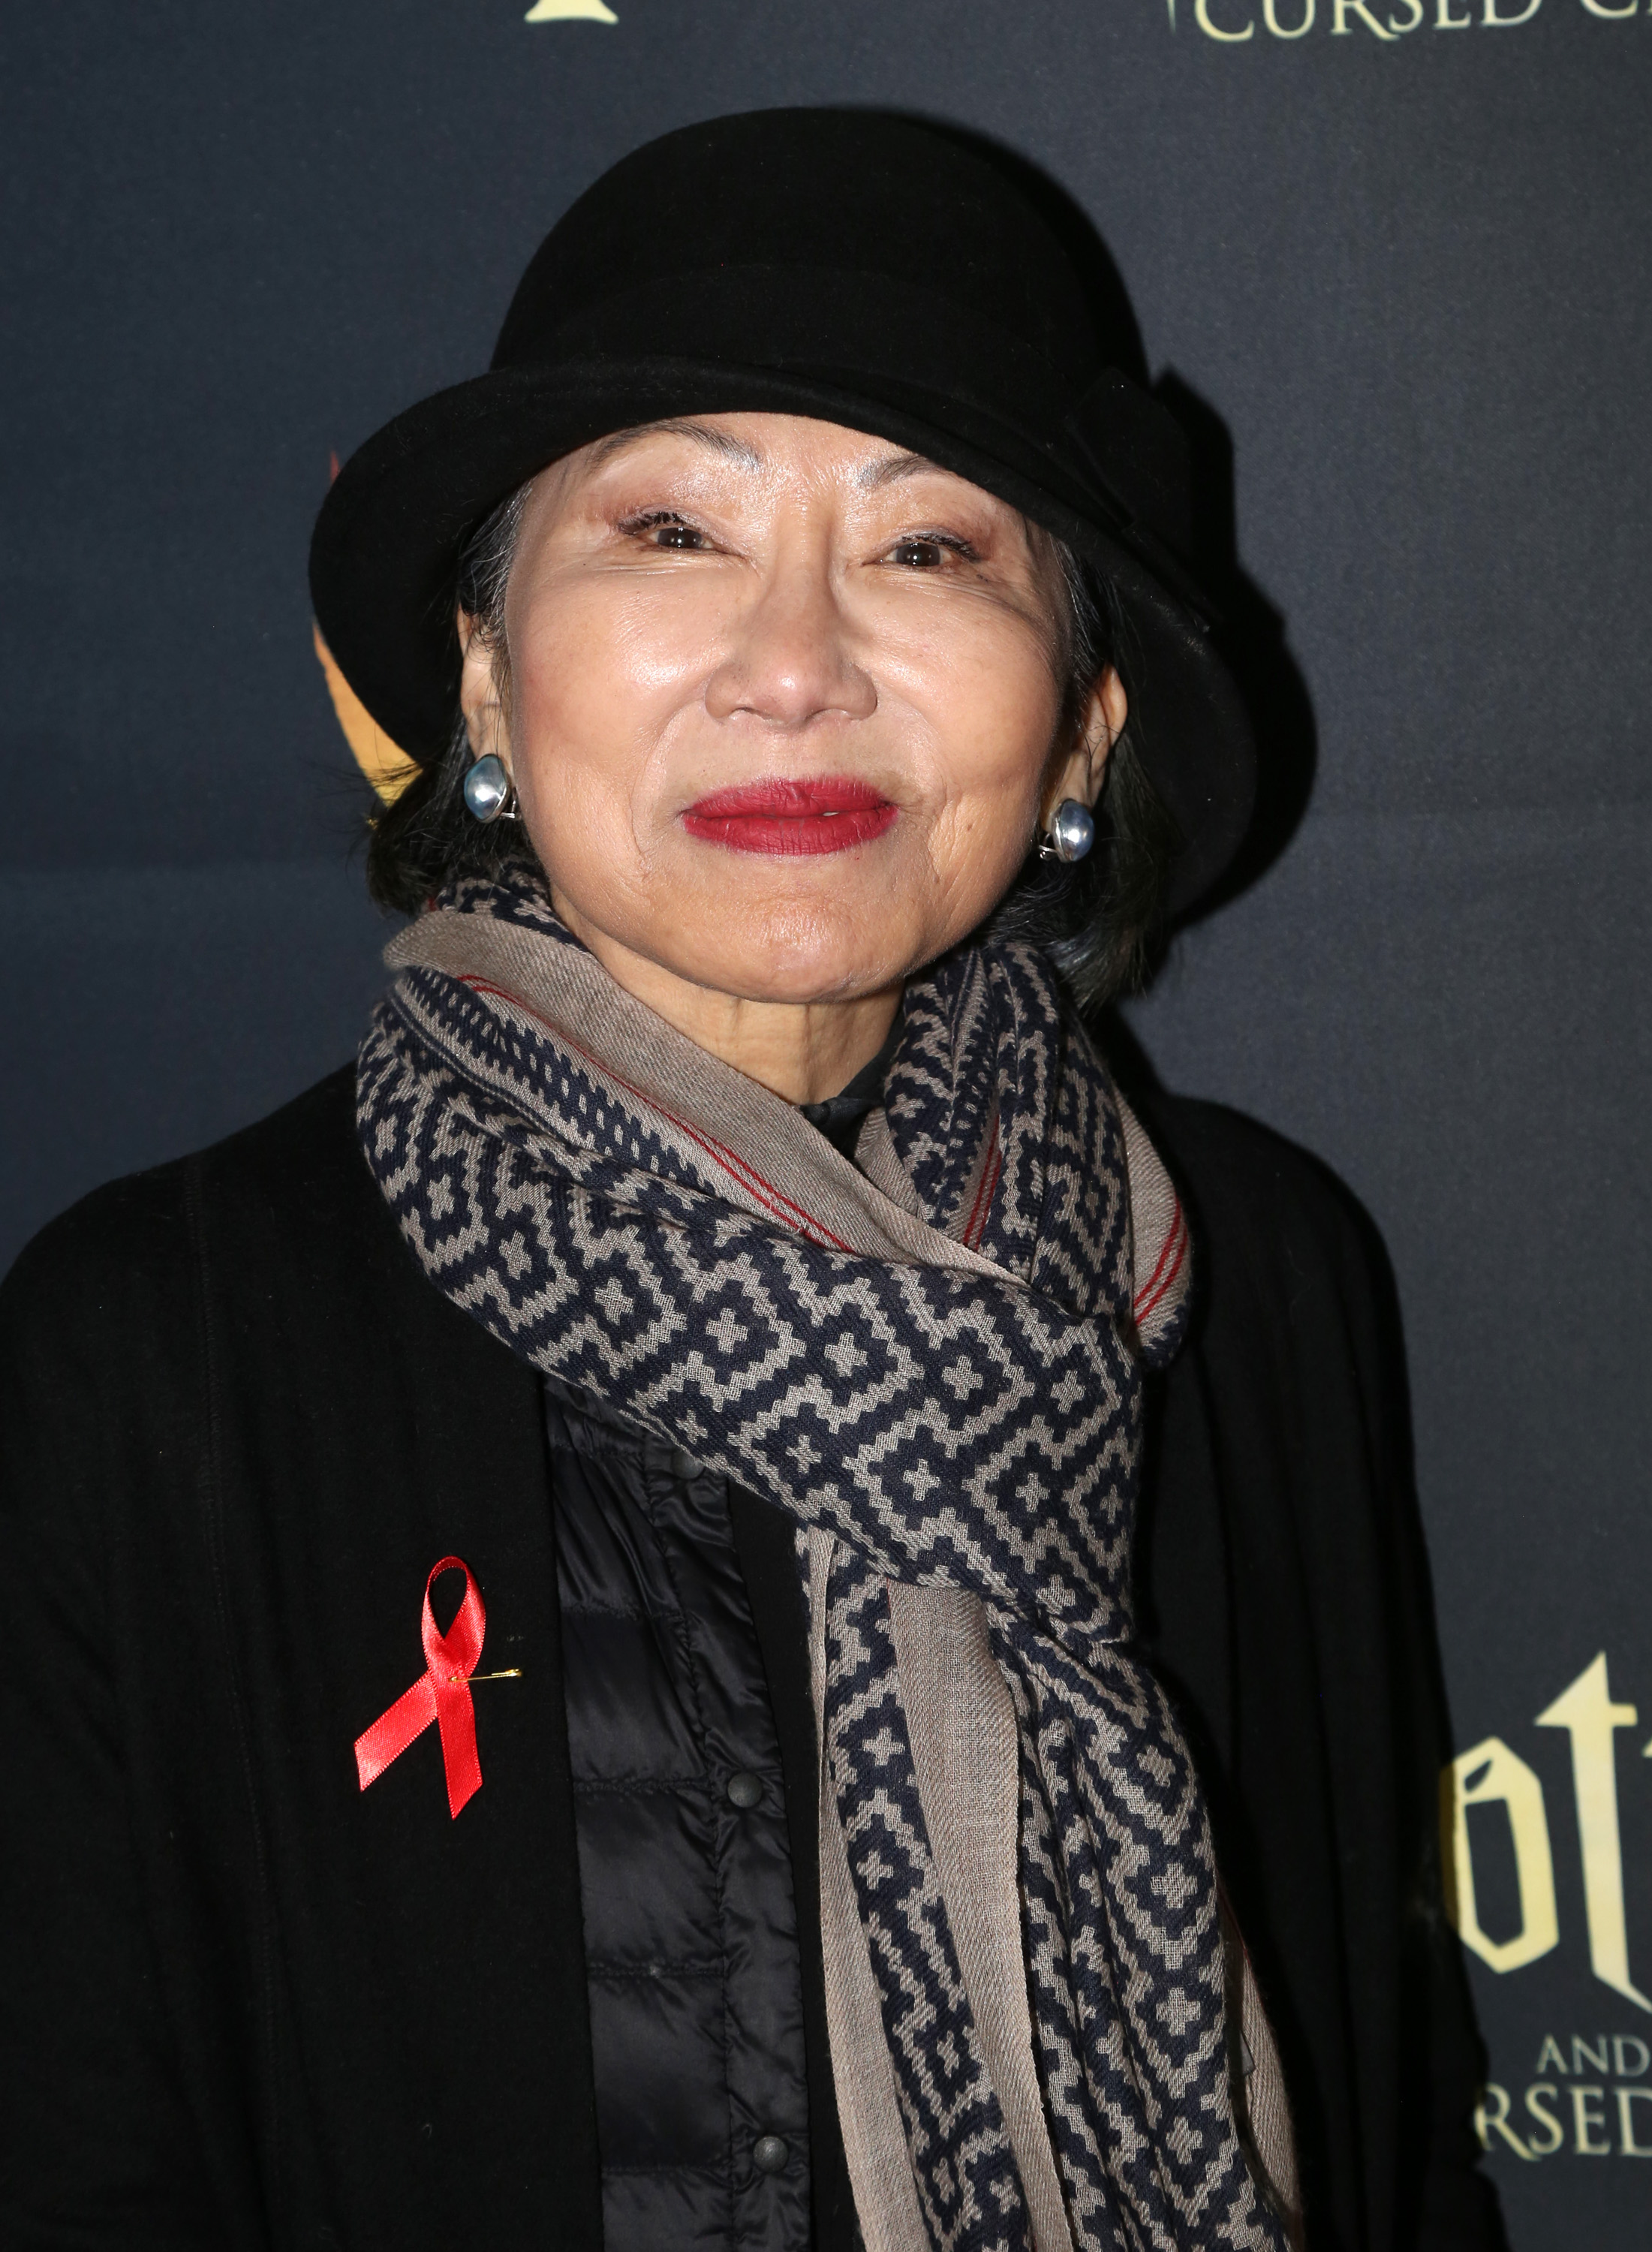 Amy Tan poses at the opening night of "Harry Potter and The Cursed Child, Parts One & 2" at The Curran Theatre in San Francisco, California on December 1, 2019. | Source: Getty Images